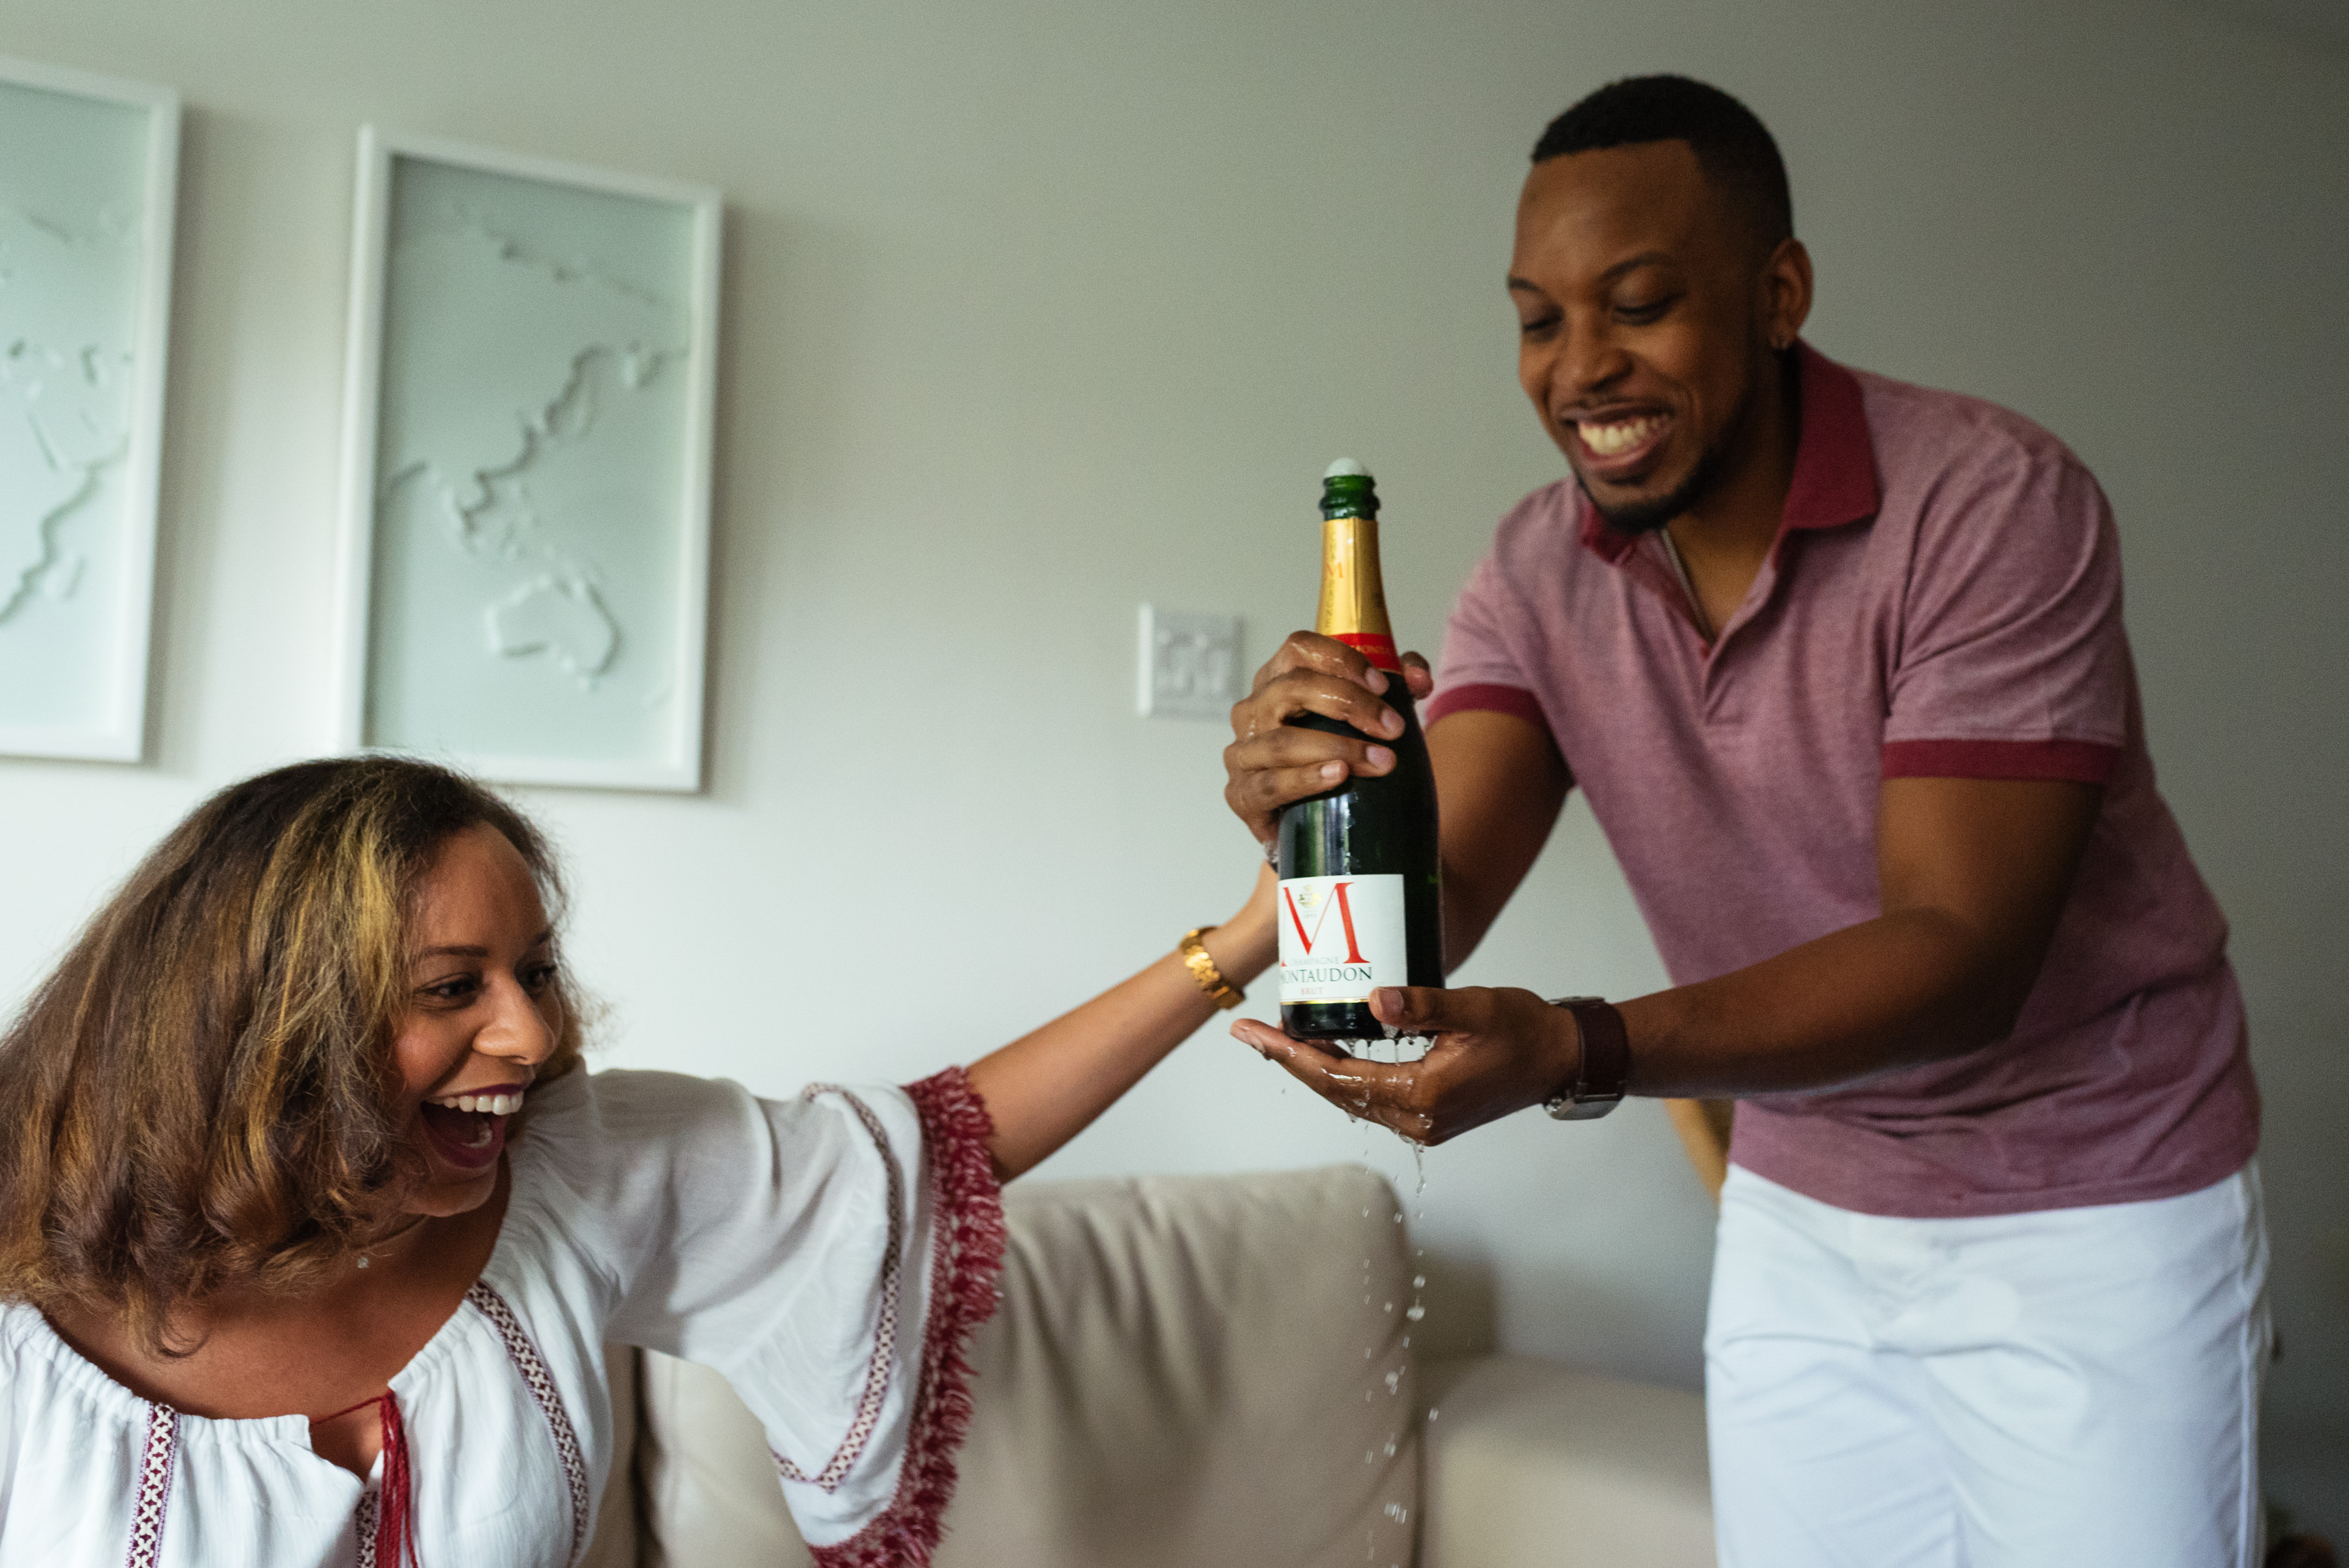 Popped champagne dripping during engagement photos